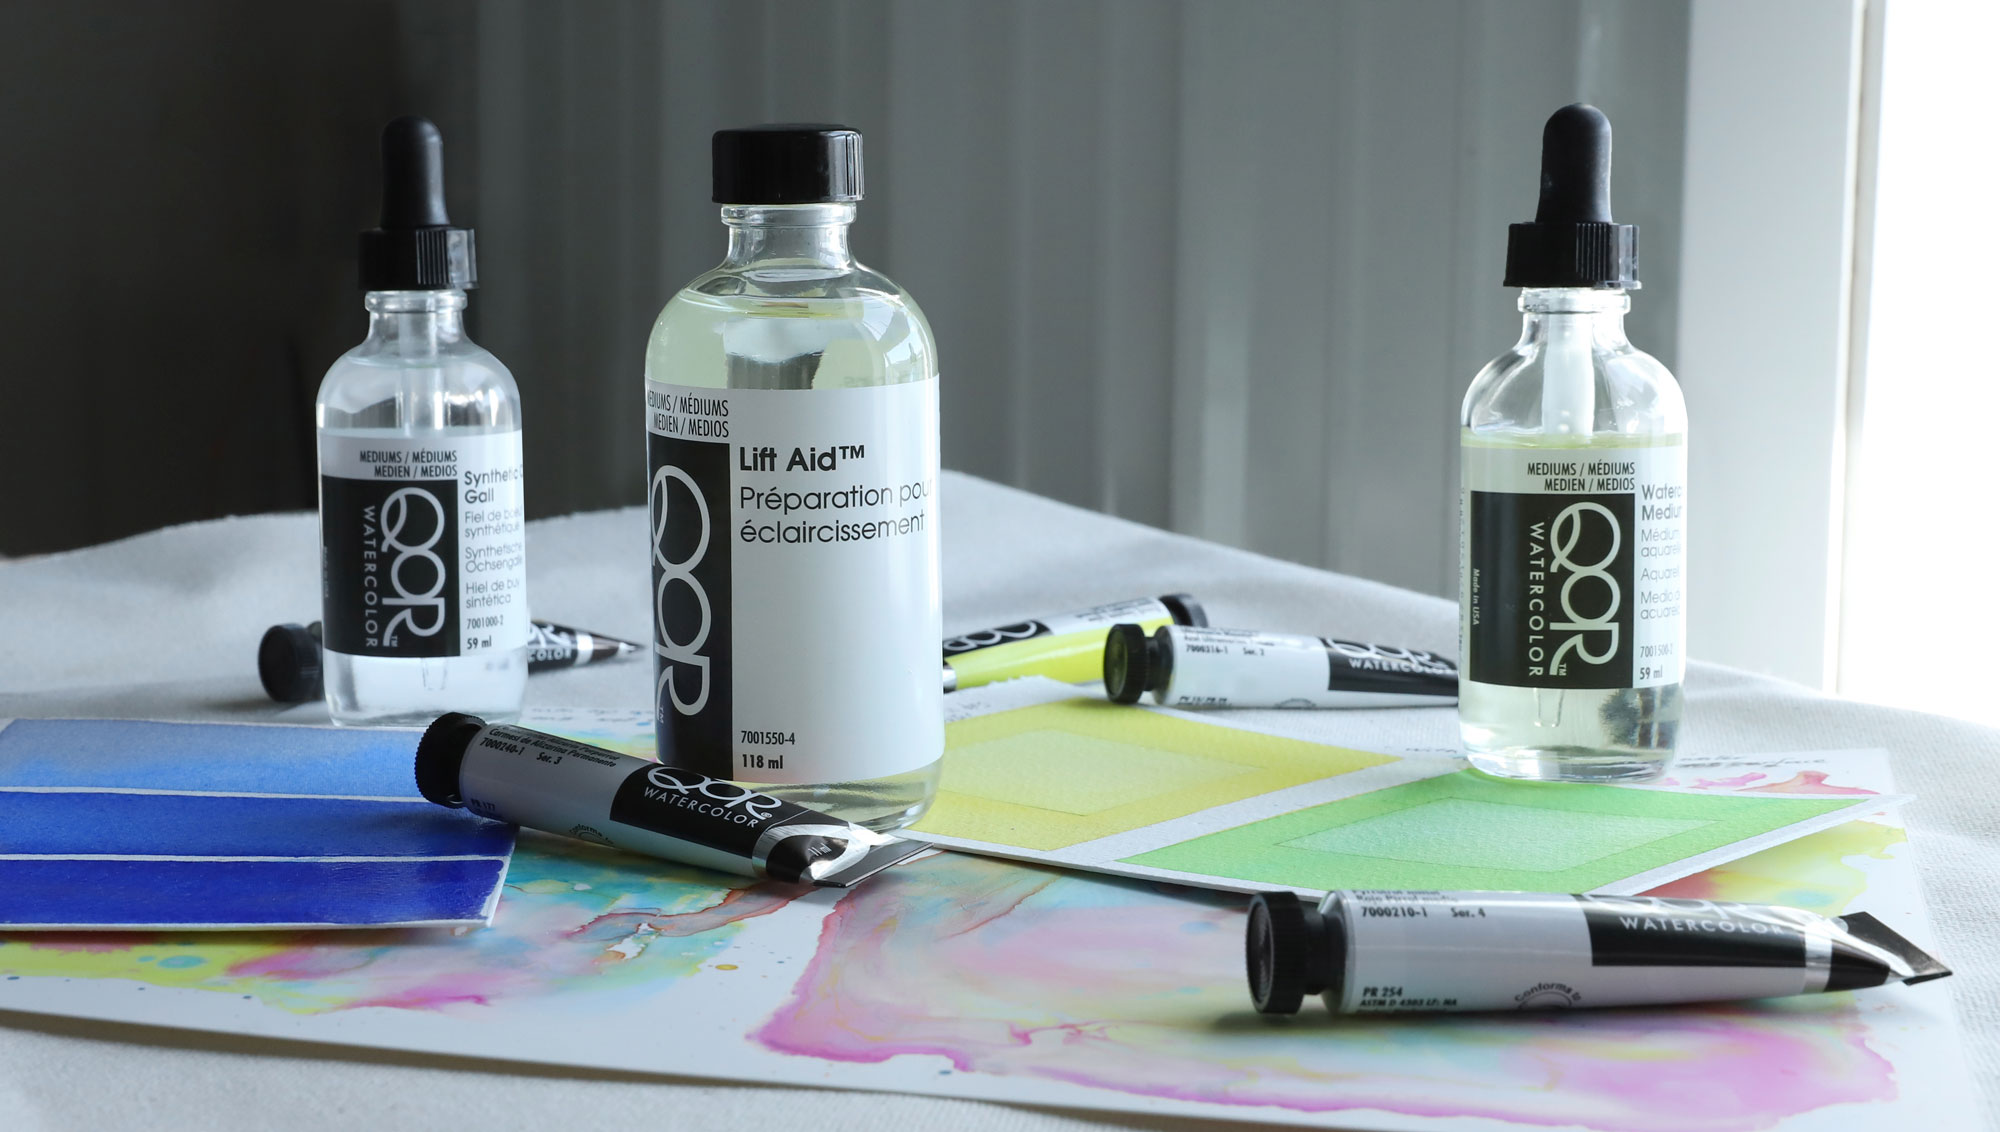 QoR Watercolors - QoR Watercolors Masking Fluid is a latex-based medium for  masking areas of paper prior to applying color washes. With a consistency  perfect for masking intricately detailed areas in watercolor